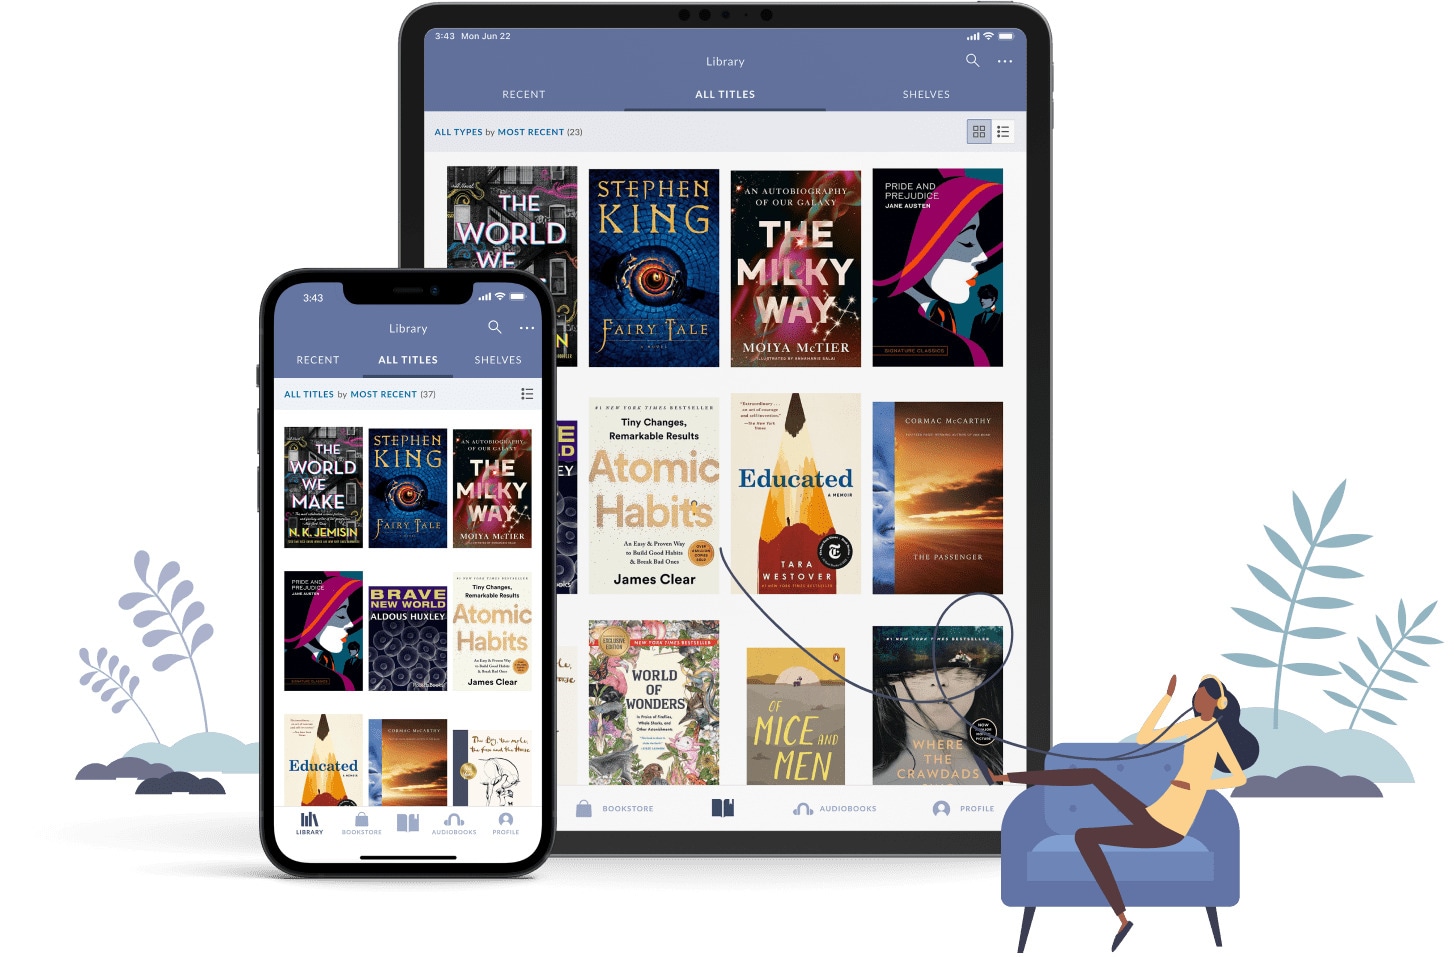 Barnes and Noble Nook ebook collection